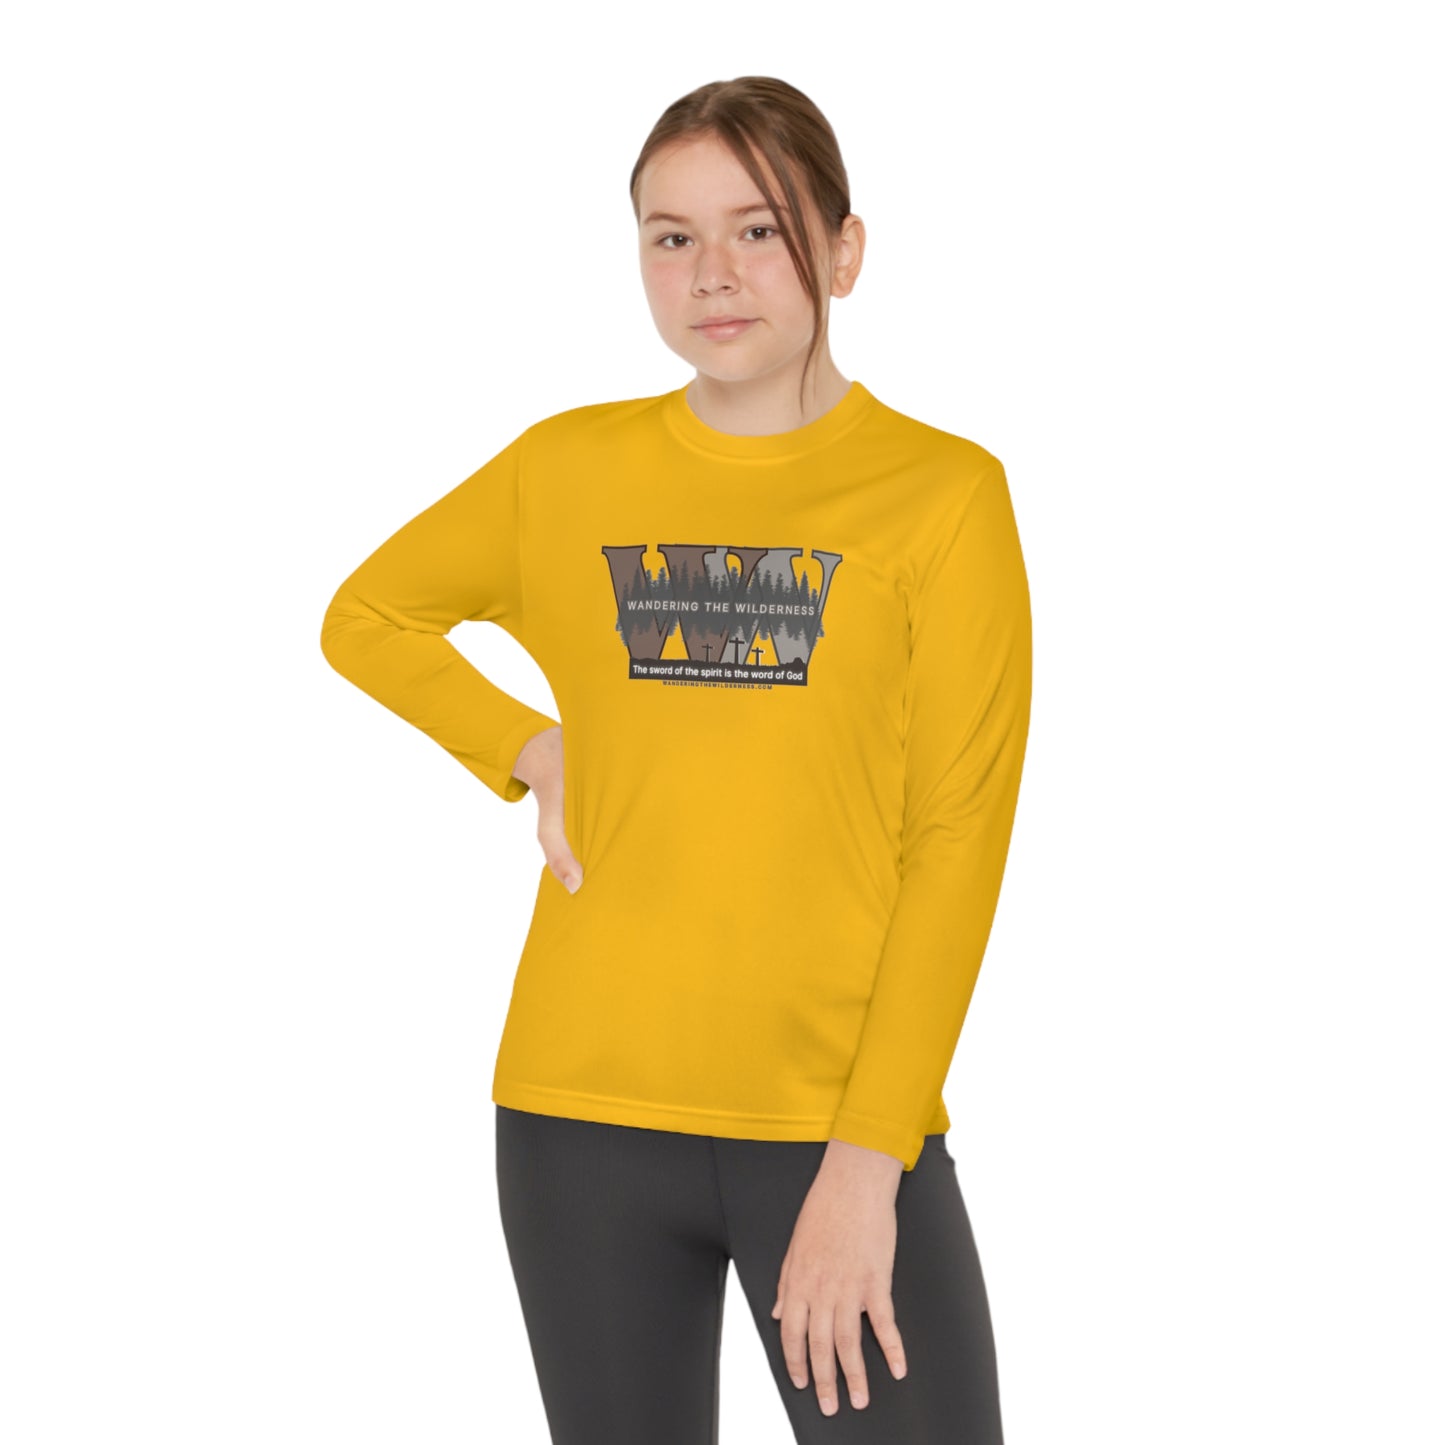 Wandering the Wilderness Kids big logo on front performance long sleeve t-shirt.